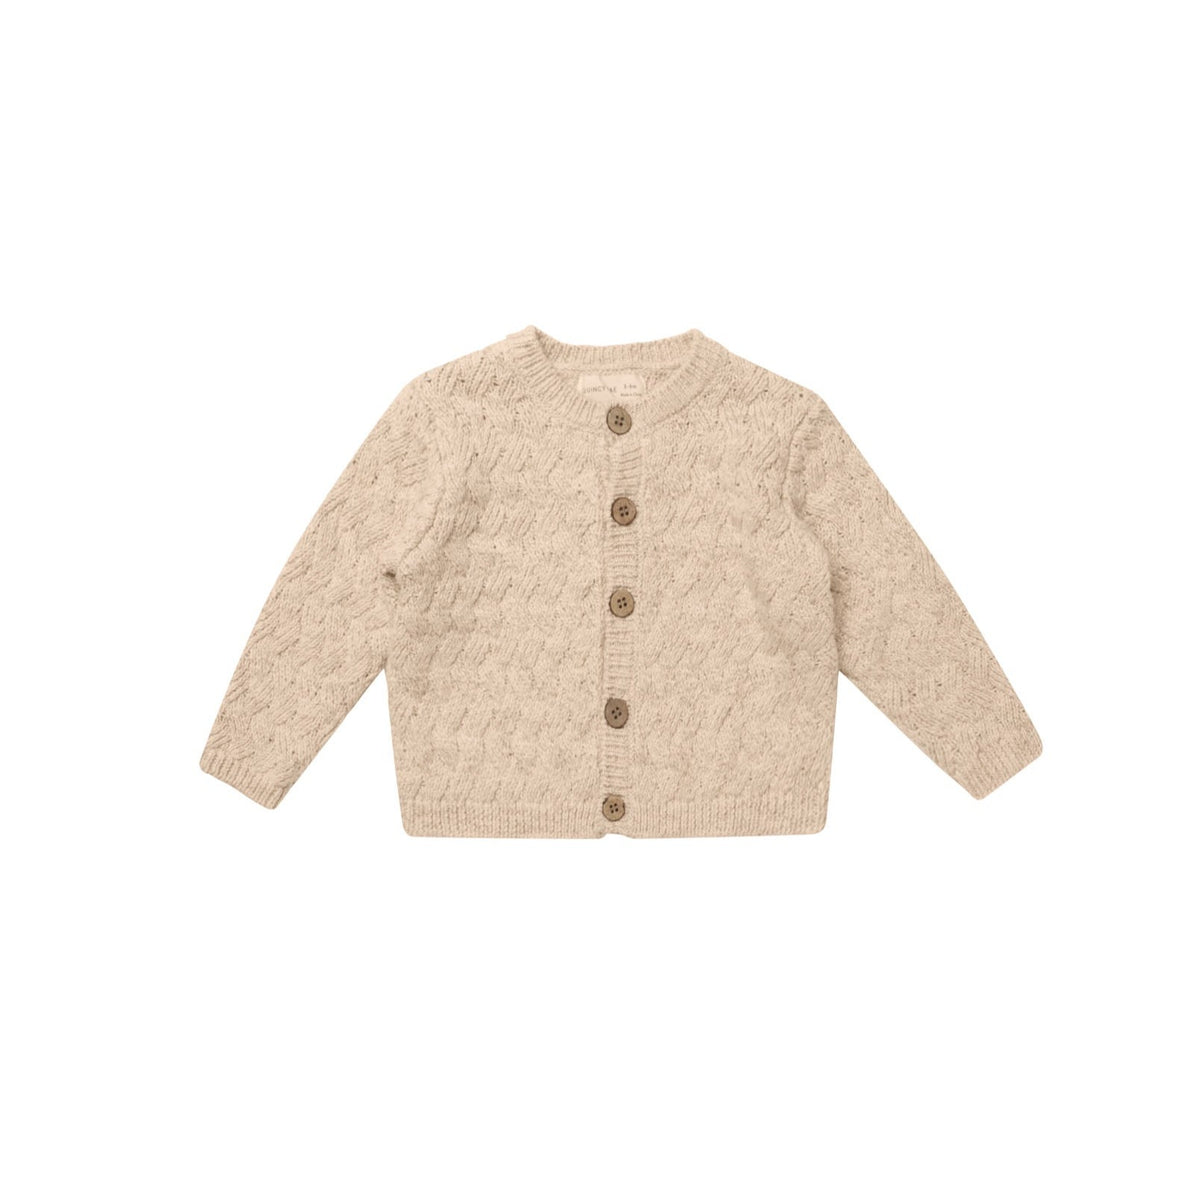 Quincy Mae Knit Cardigan Sweater - Shell